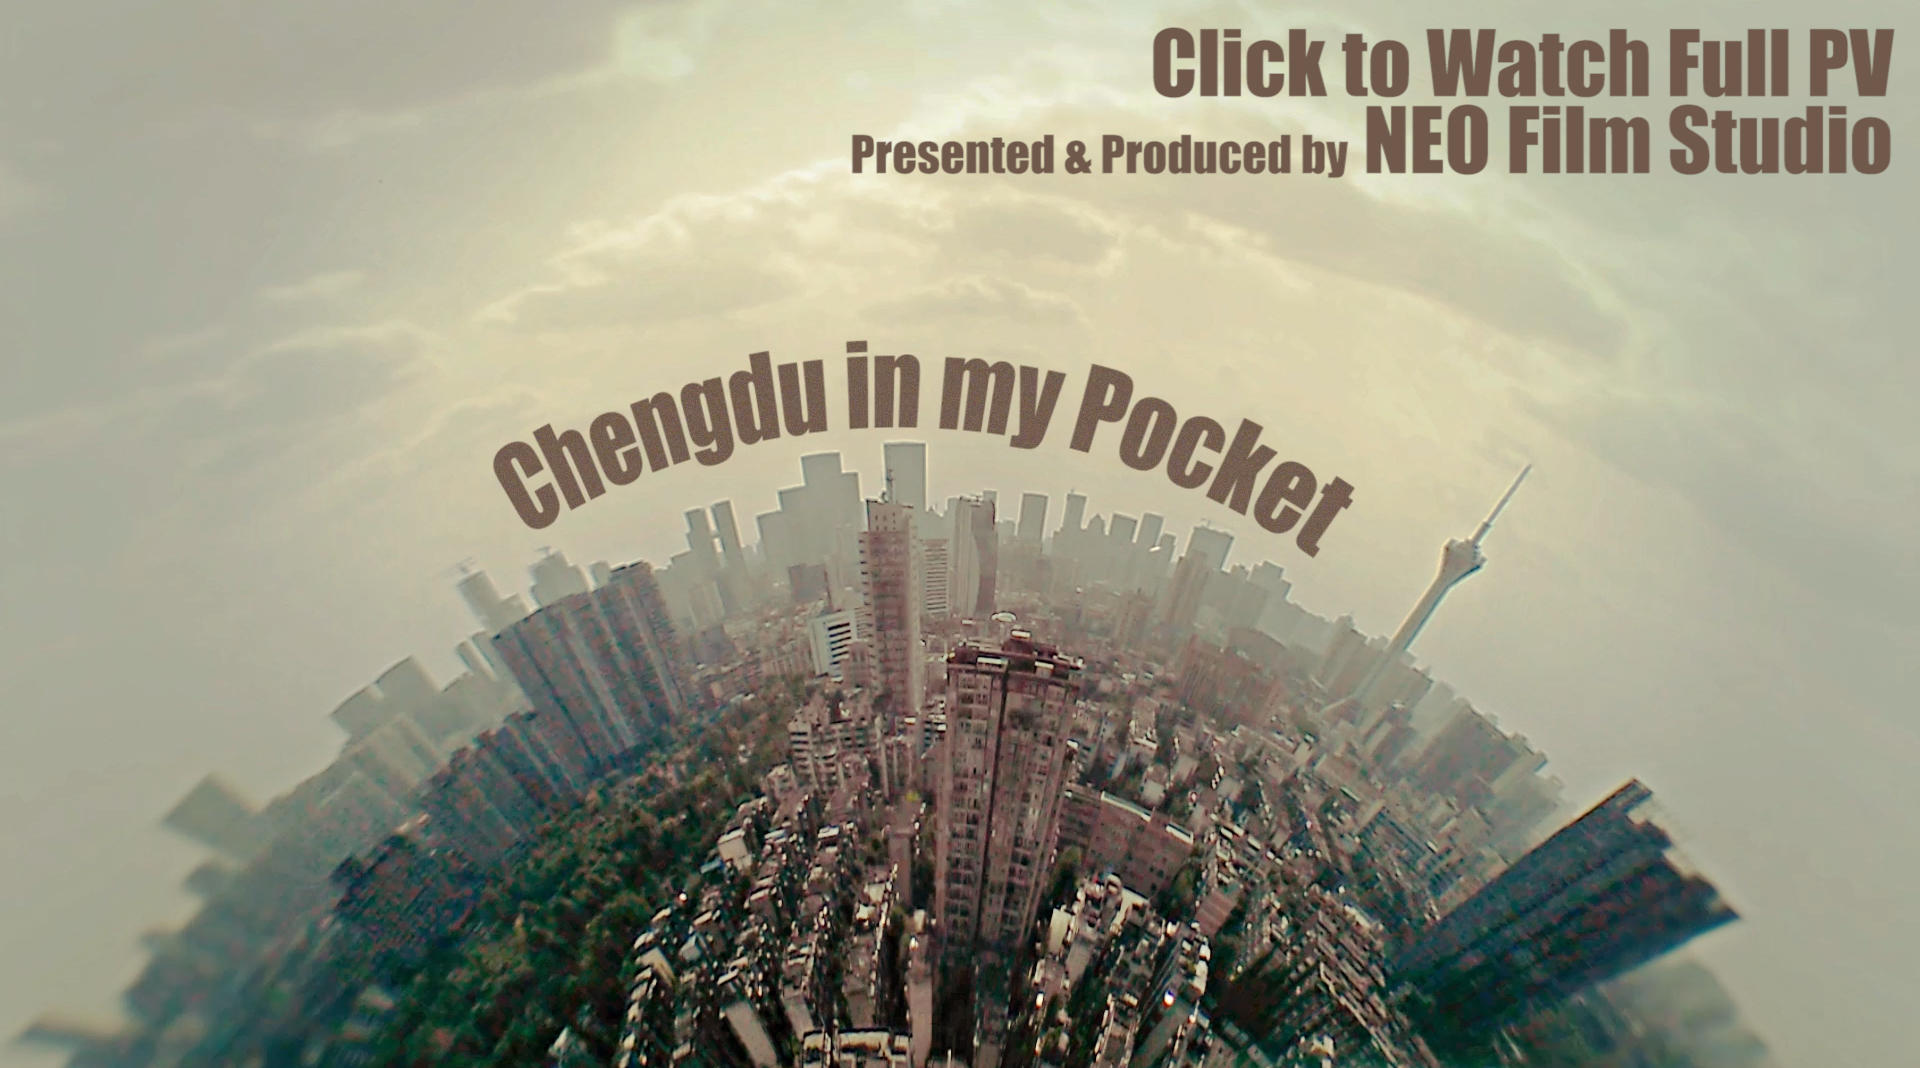 PV | NEO首季电影公开课宣传片《Chengdu in my Pocket》